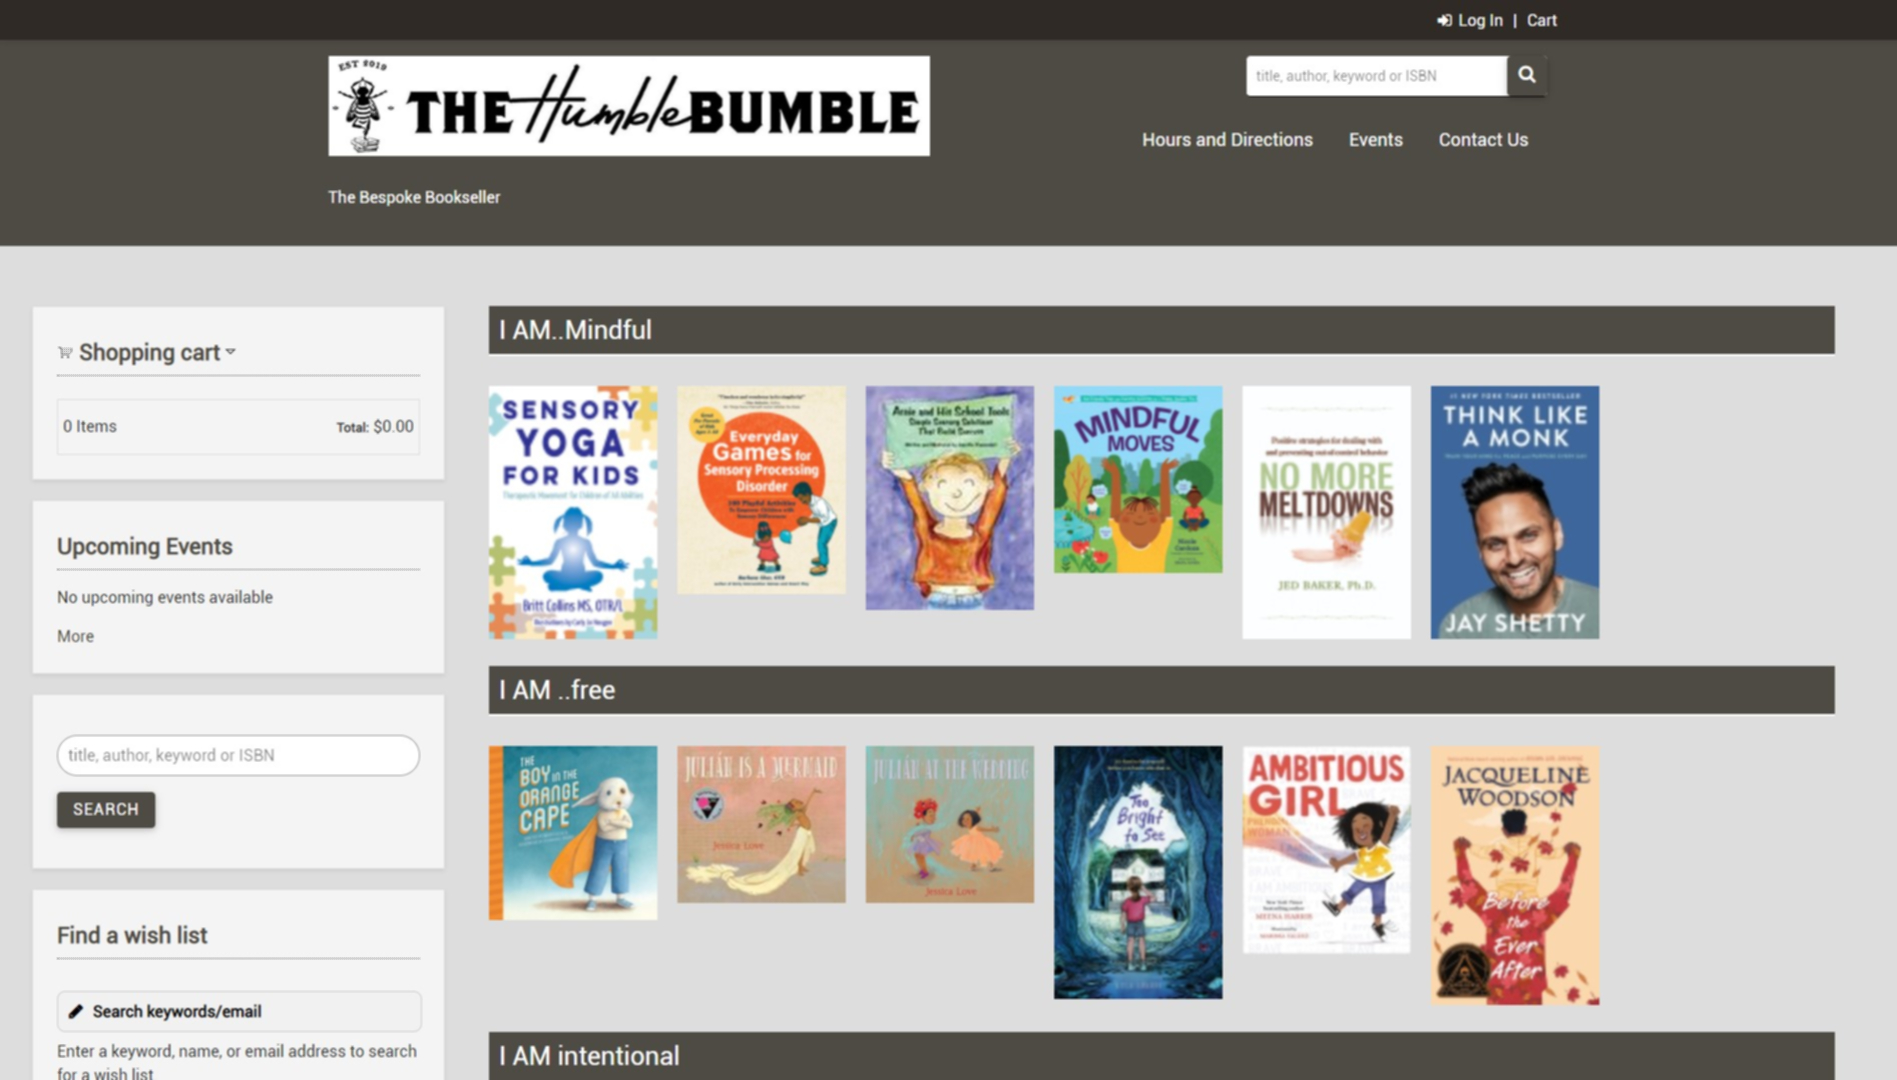 The Humble Bumble IndieLite Home Page